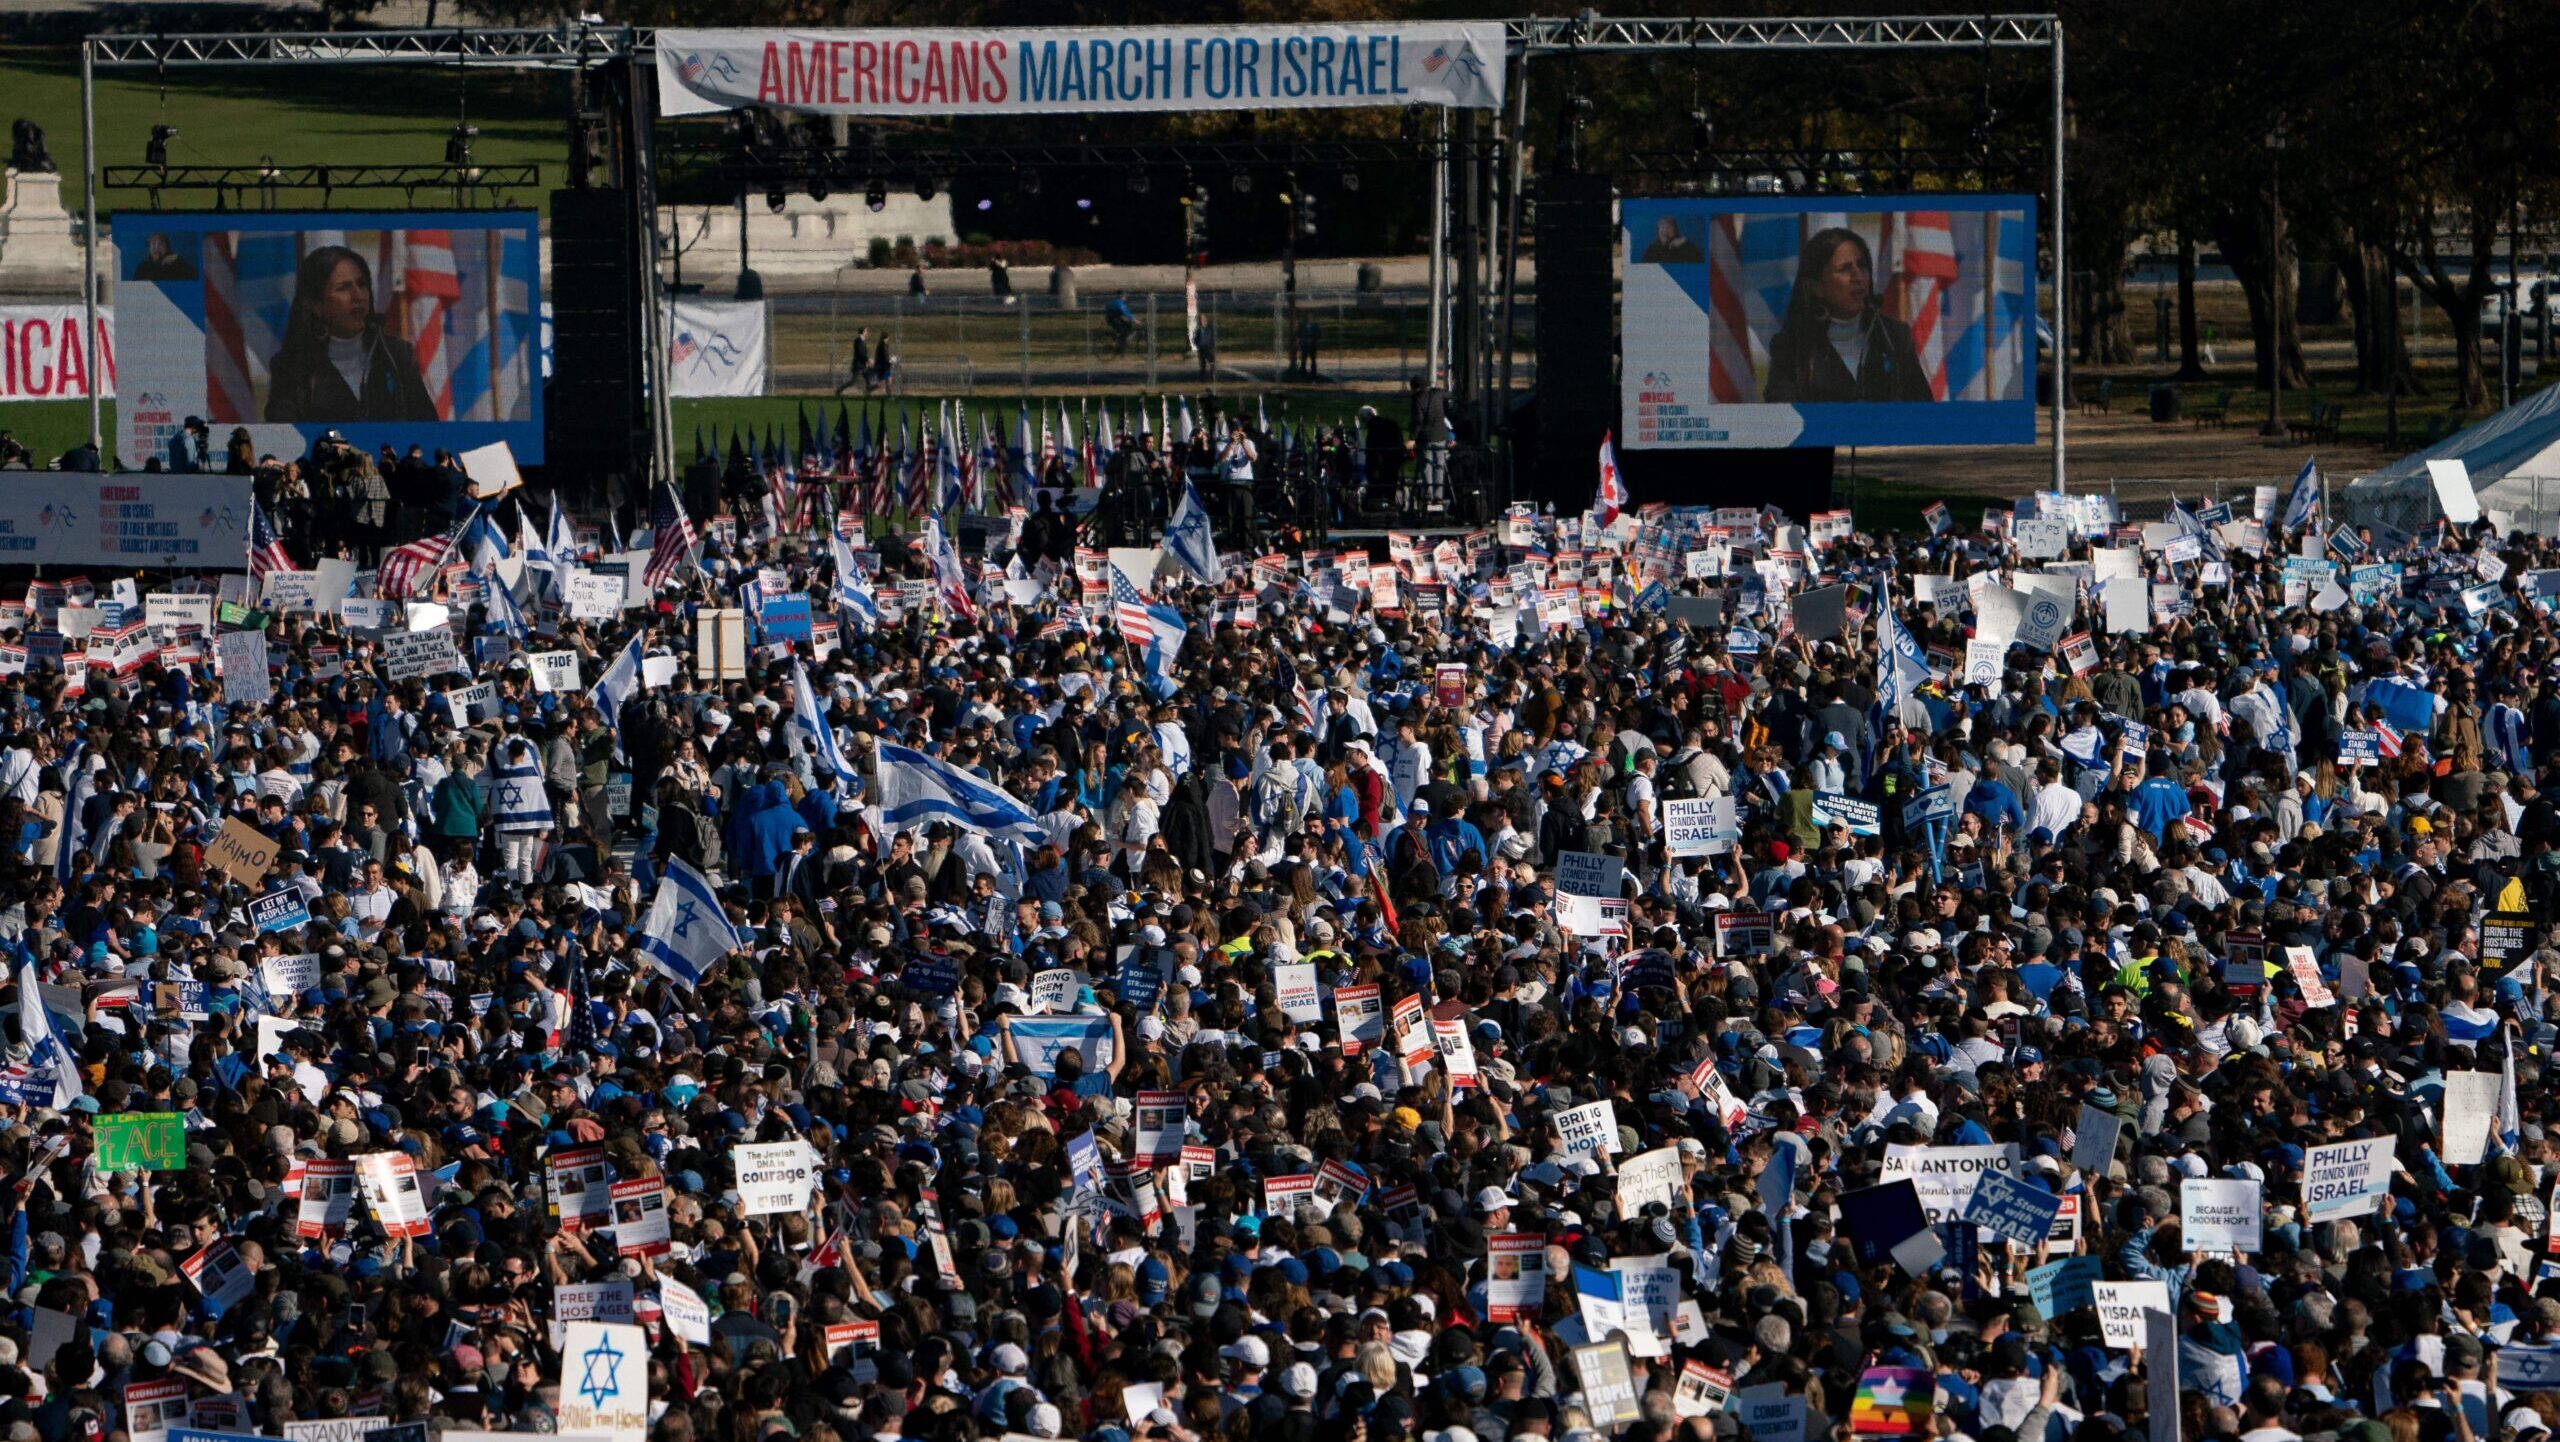 Nearly 300,000 Rally in Support of Israel in Washington, DC